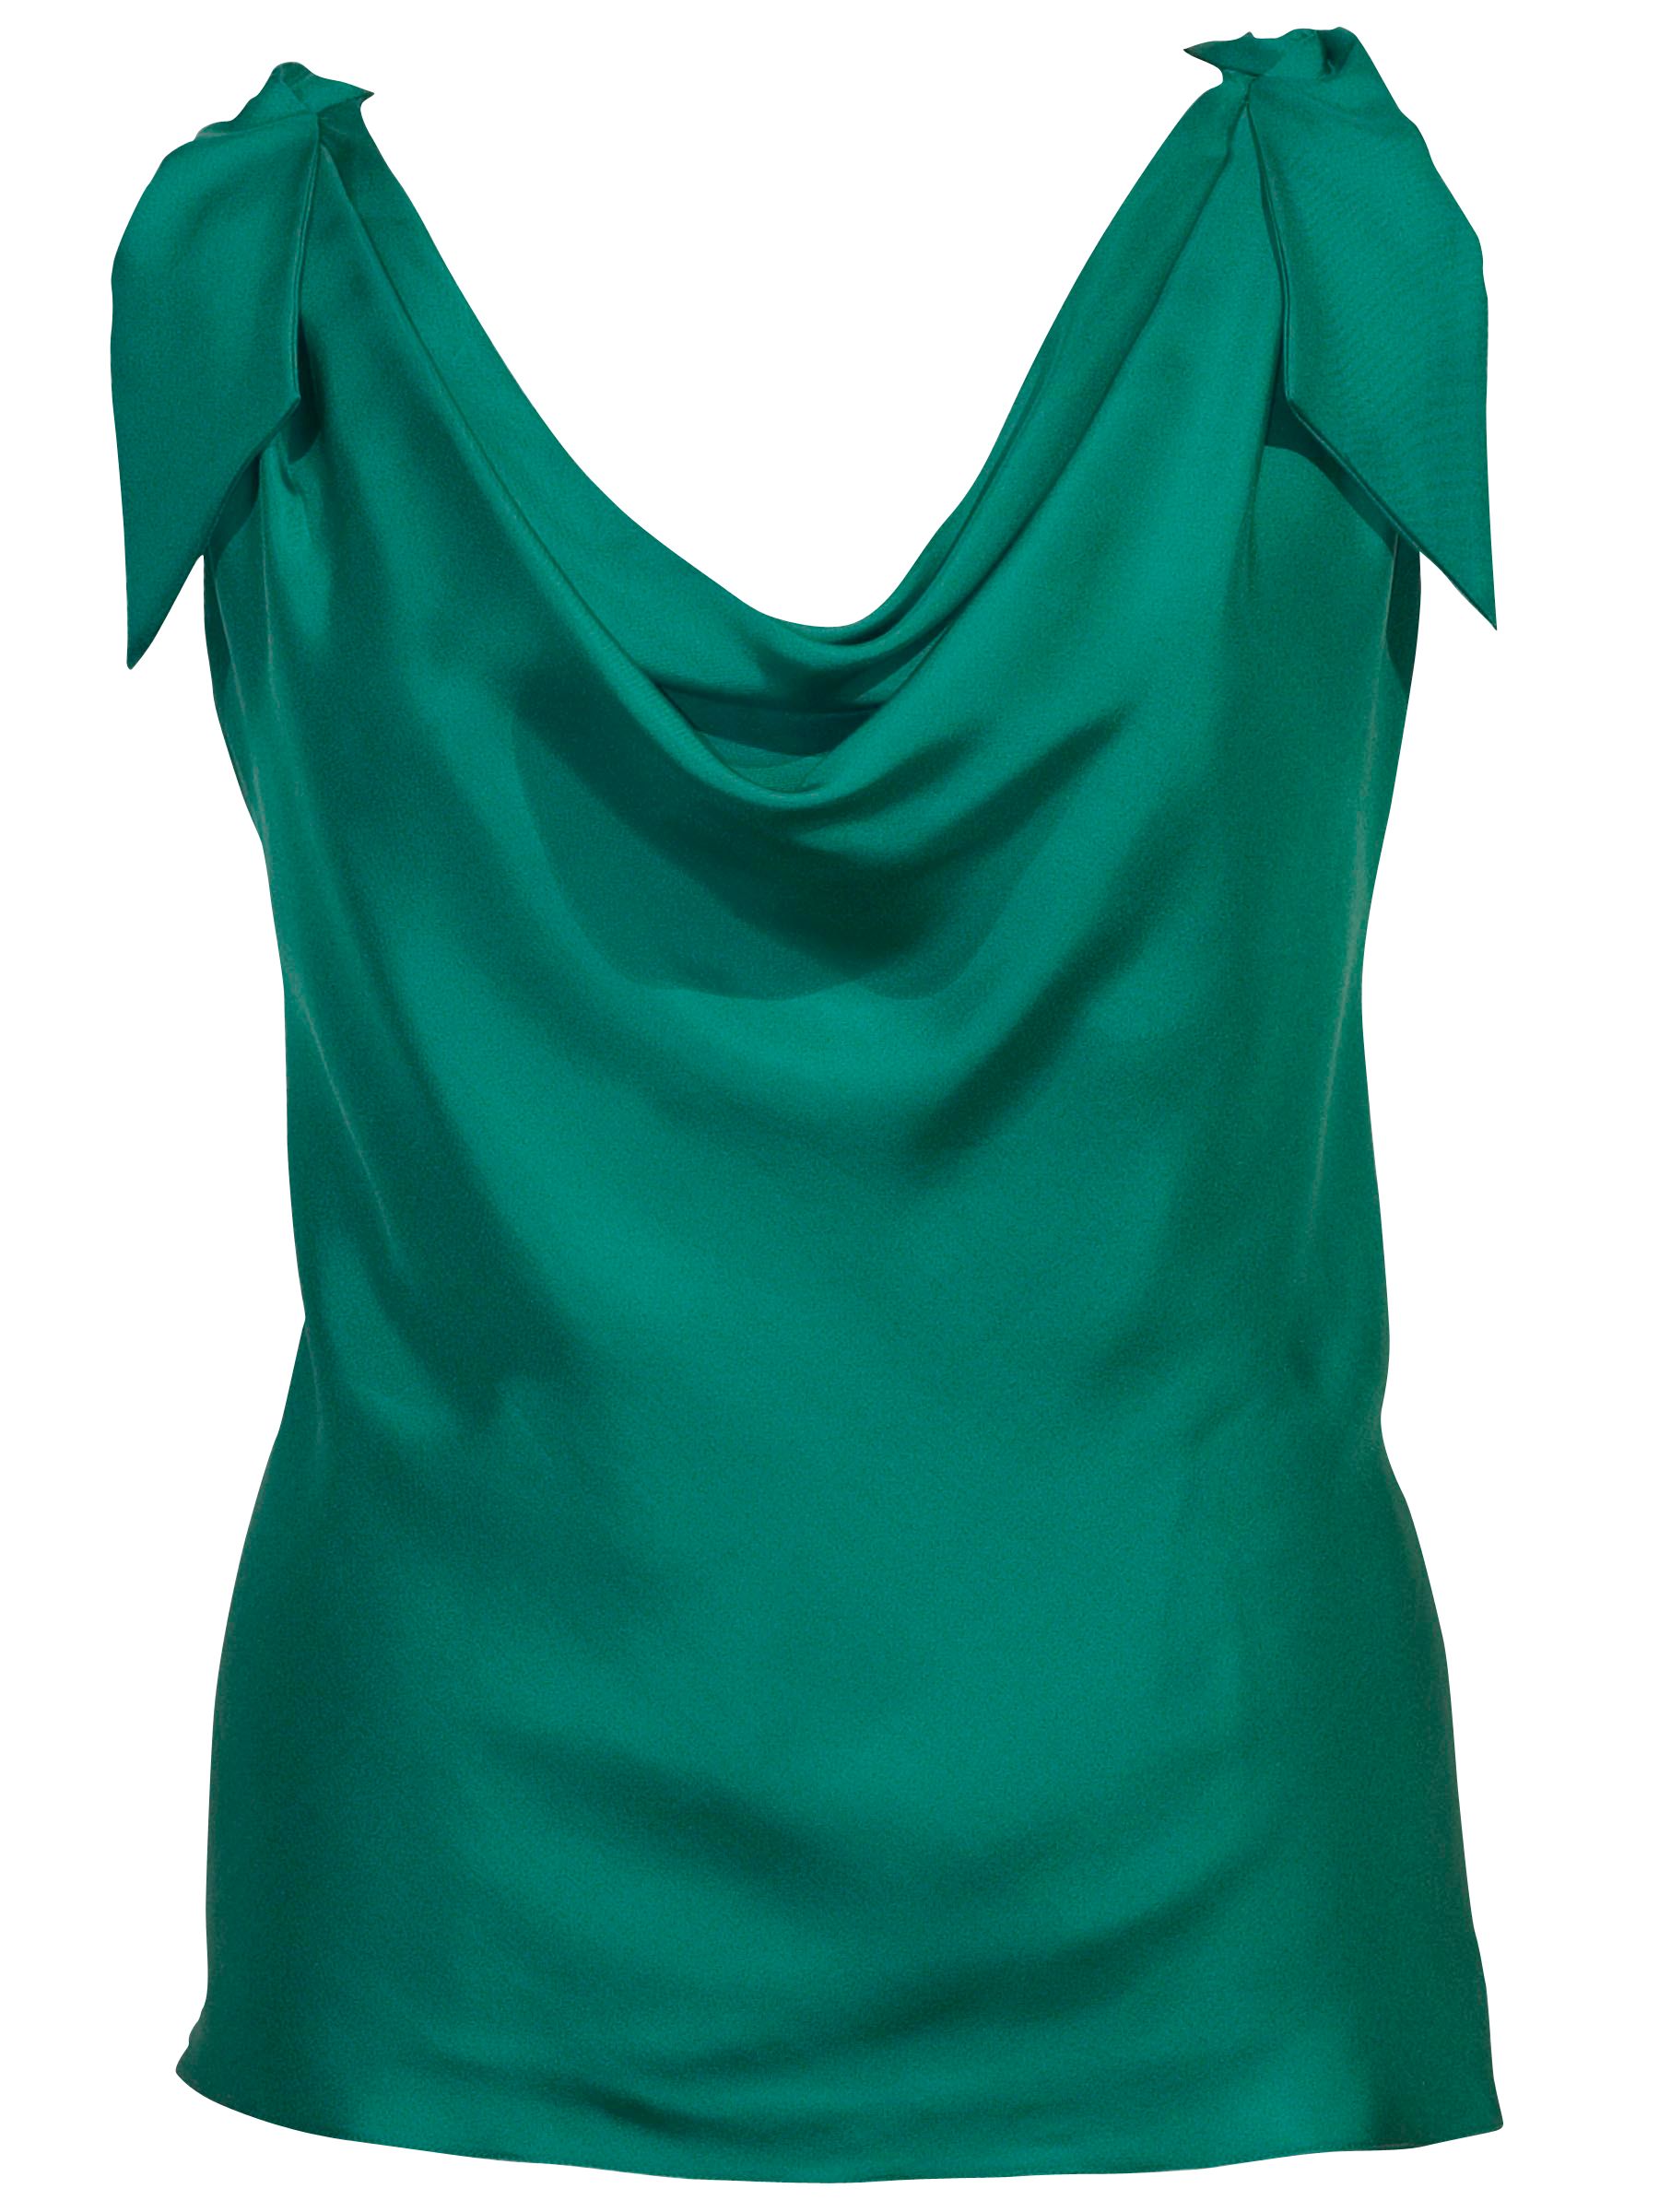 Chesca Now By Chesca Knot Shoulder Blouse, Jade